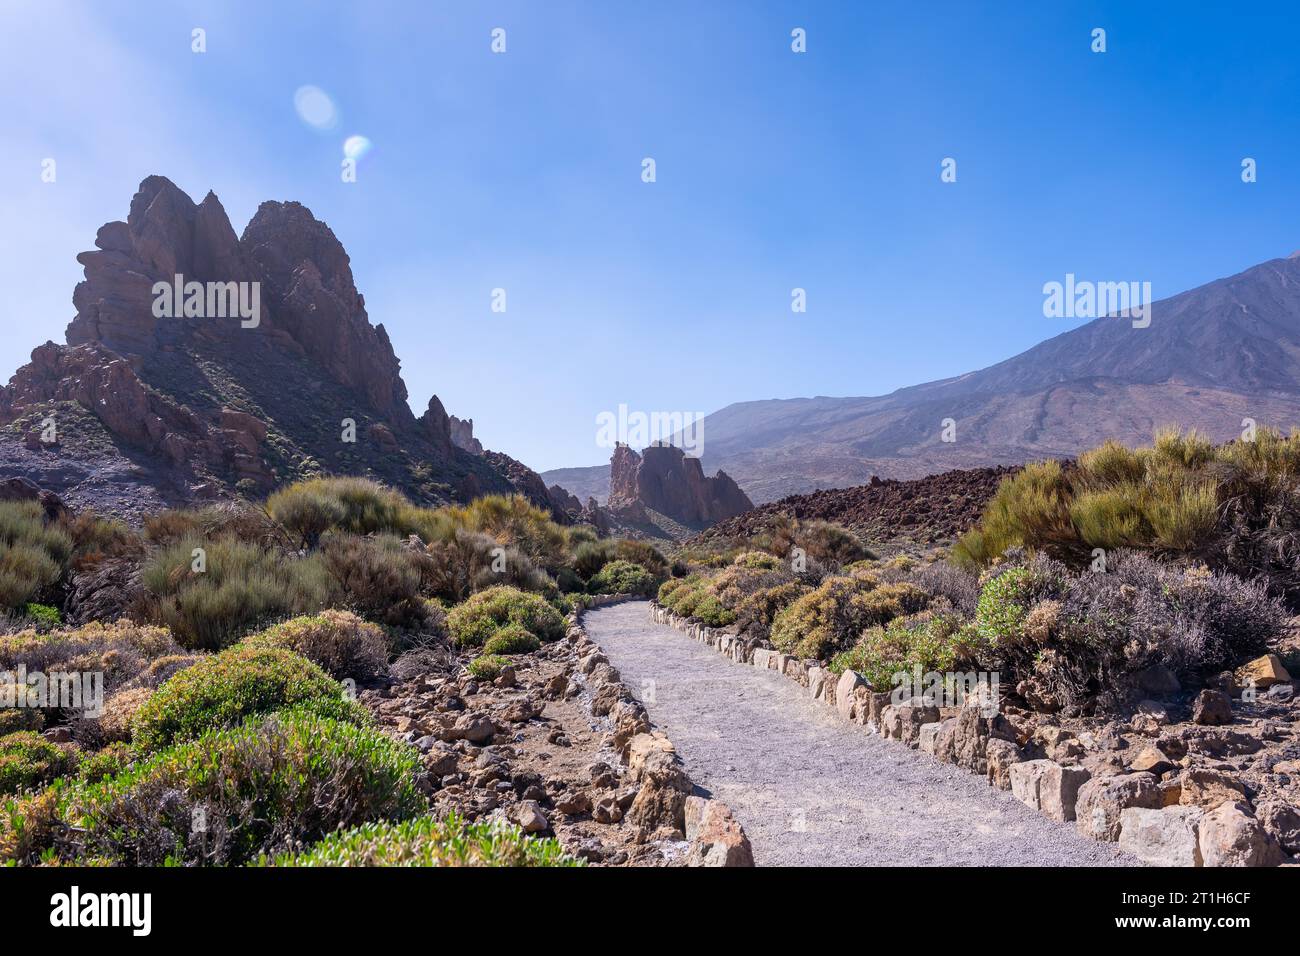 Beautiful path between the Roques de Gracia and the Roque Cinchado in the natural area of Teide in Tenerife, Canary Islands Stock Photo